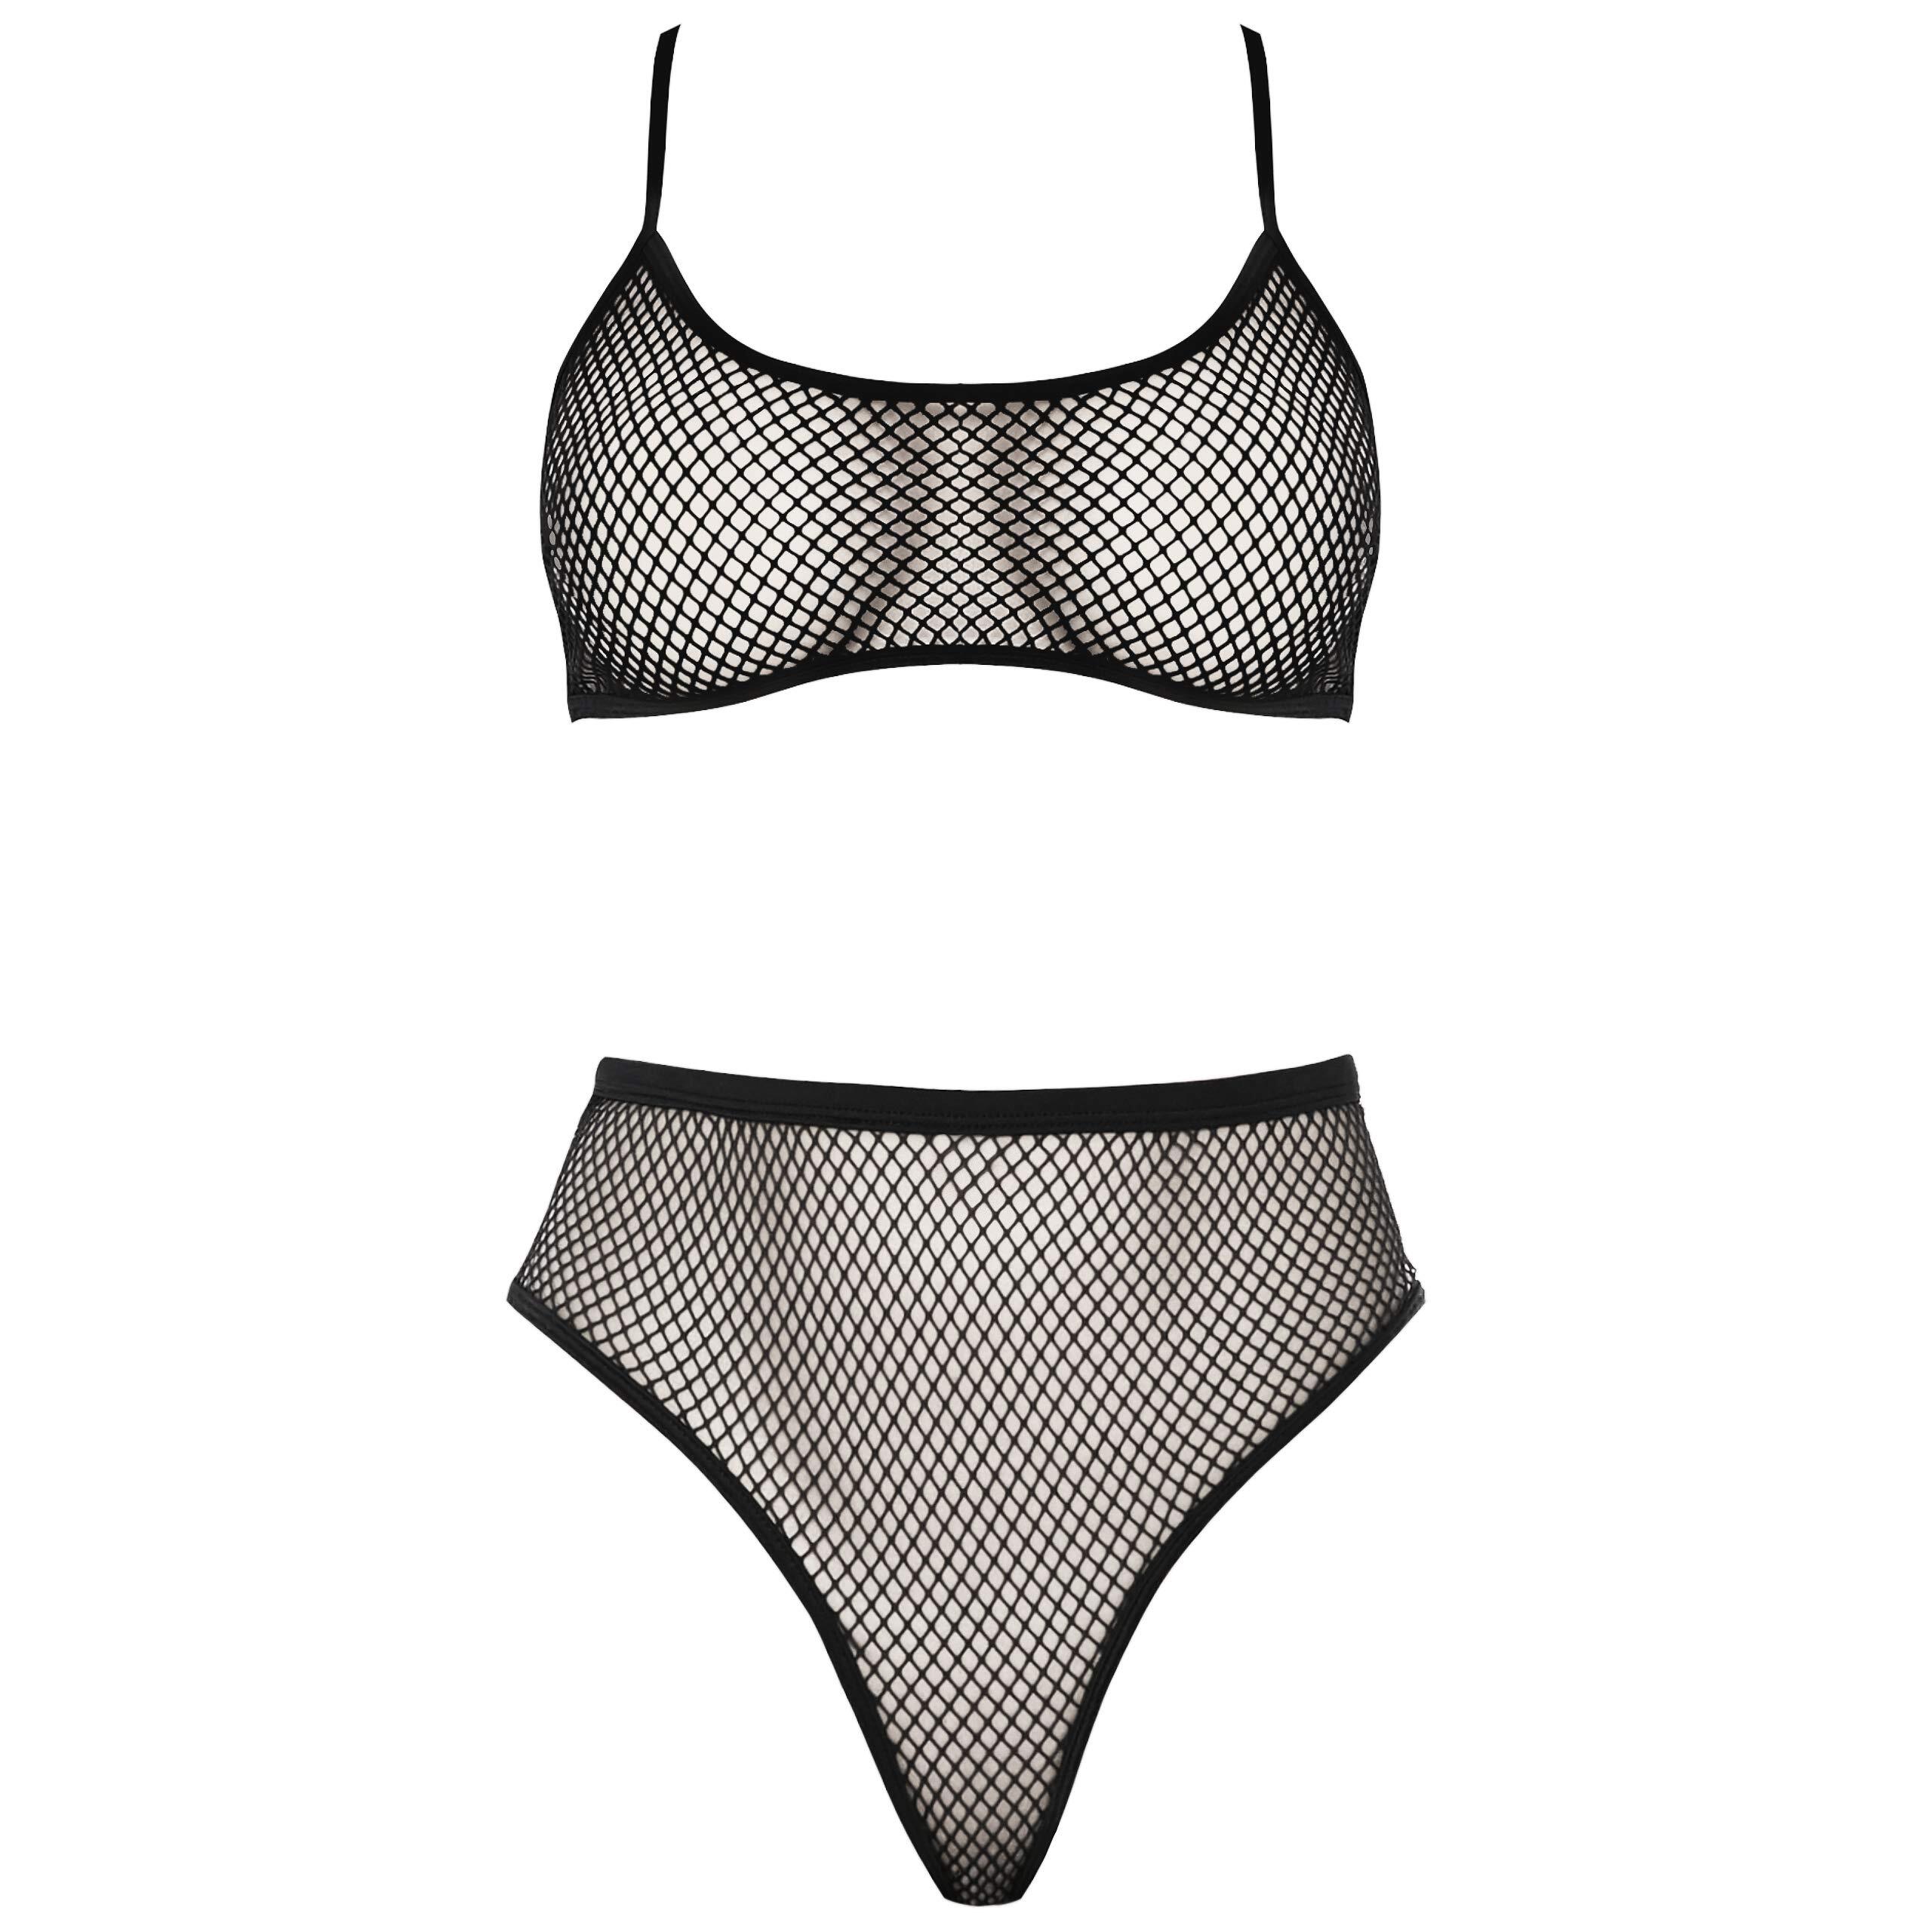 Lingerie Collection Caught Me Started Bra and Panty - Black M